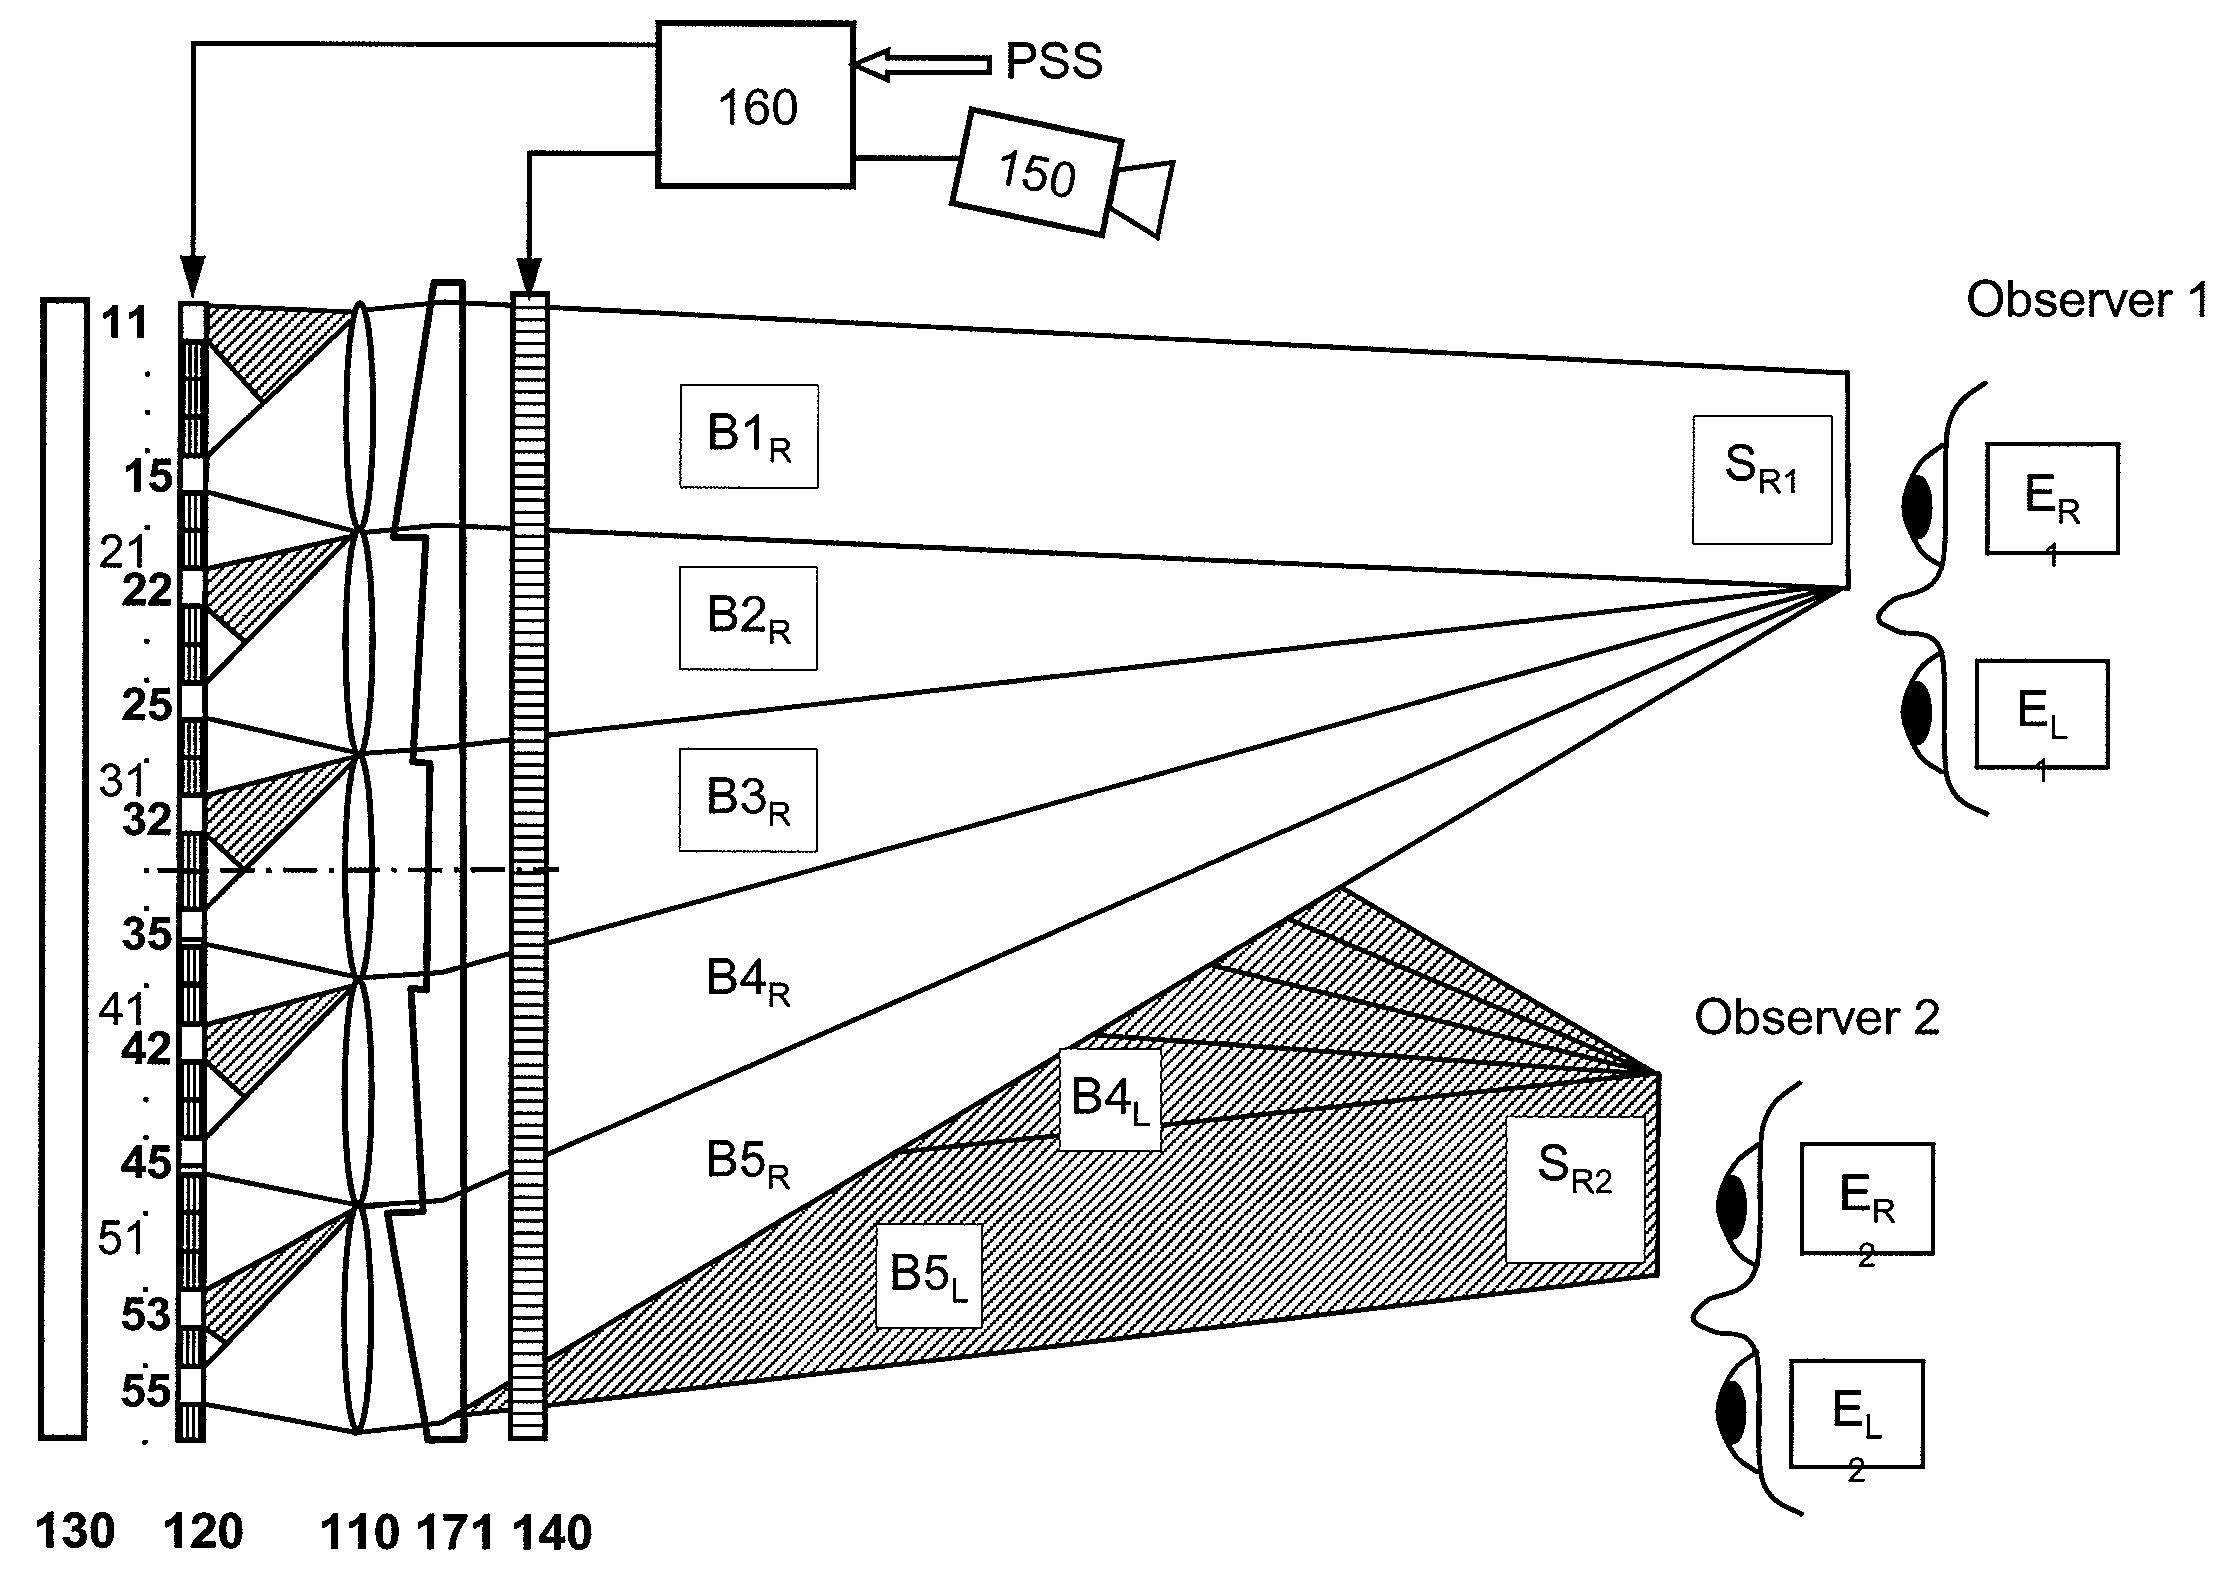 Multi-user autostereoscopic display with position tracking